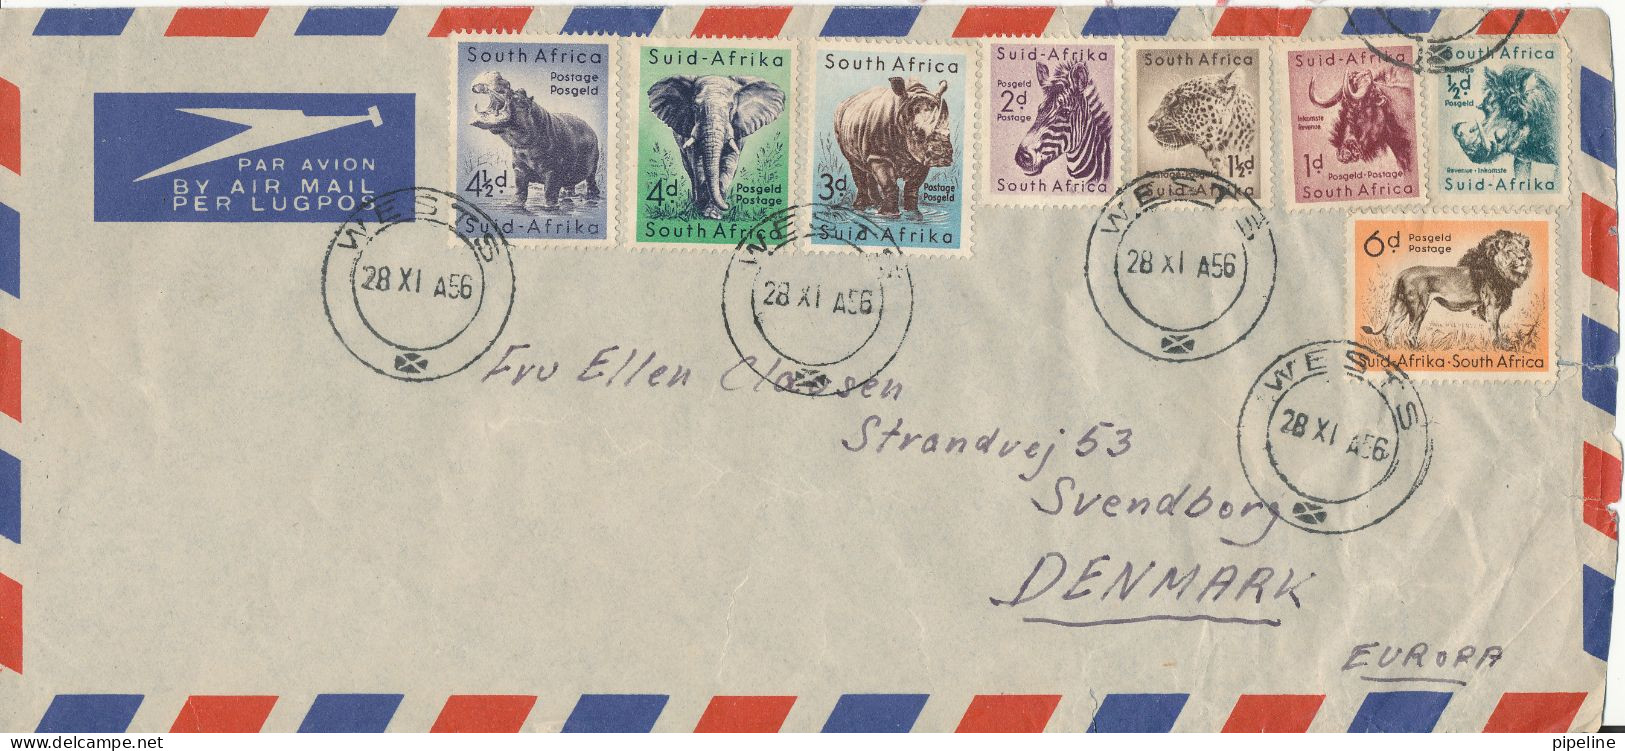 South Africa -Suid Afrika Air Mail Cover Sent To Denmark Wests 28-11-1956 With A Lot Of Topical Stamps - Airmail